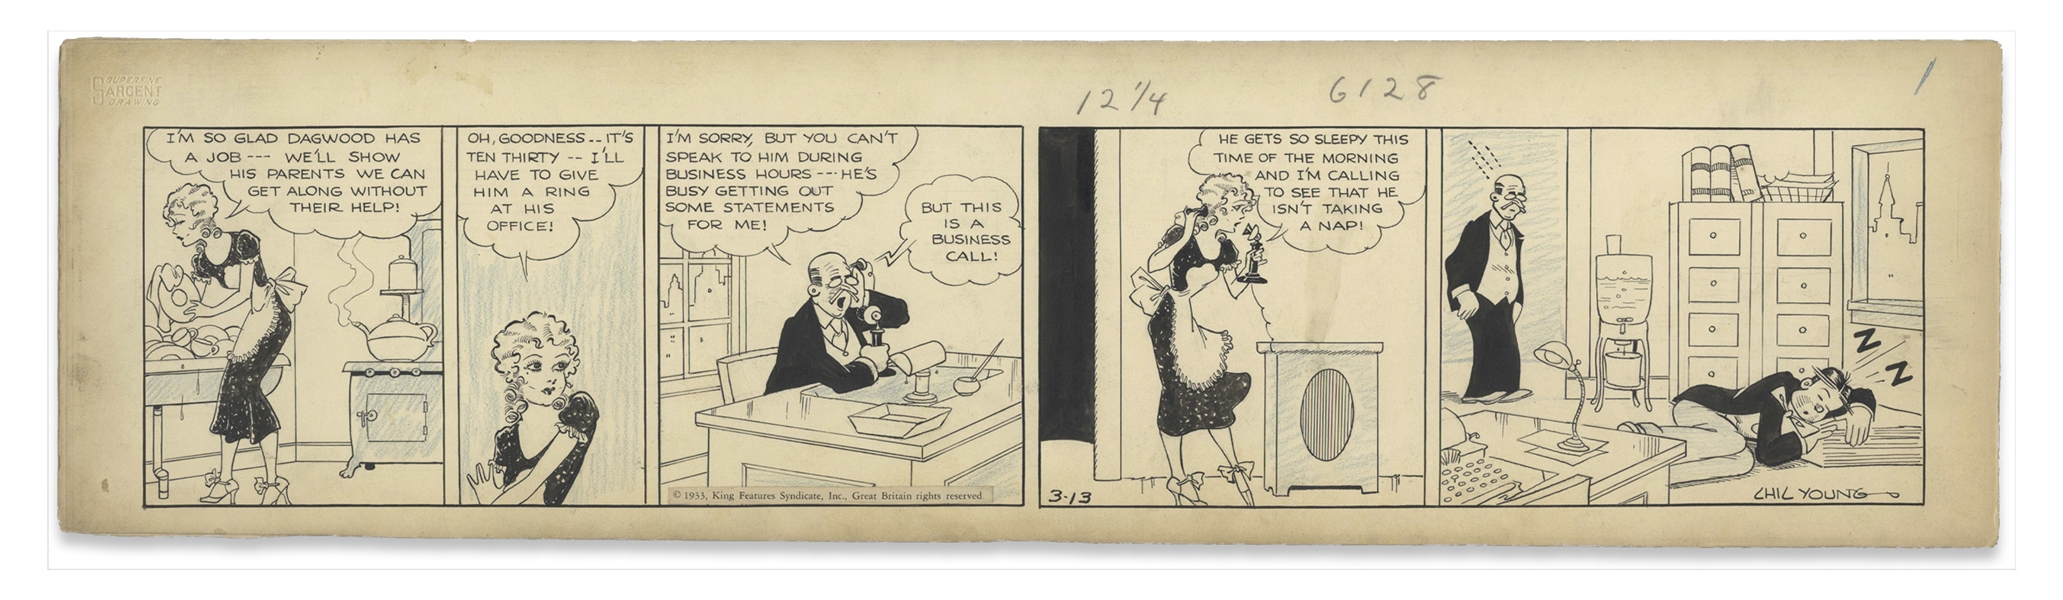 Chic Young Hand-Drawn ''Blondie'' Comic Strip From 1933 Titled ''Mrs. Rip Van Winkle'' -- The Very First Strip of Dagwood Sleeping on the Job